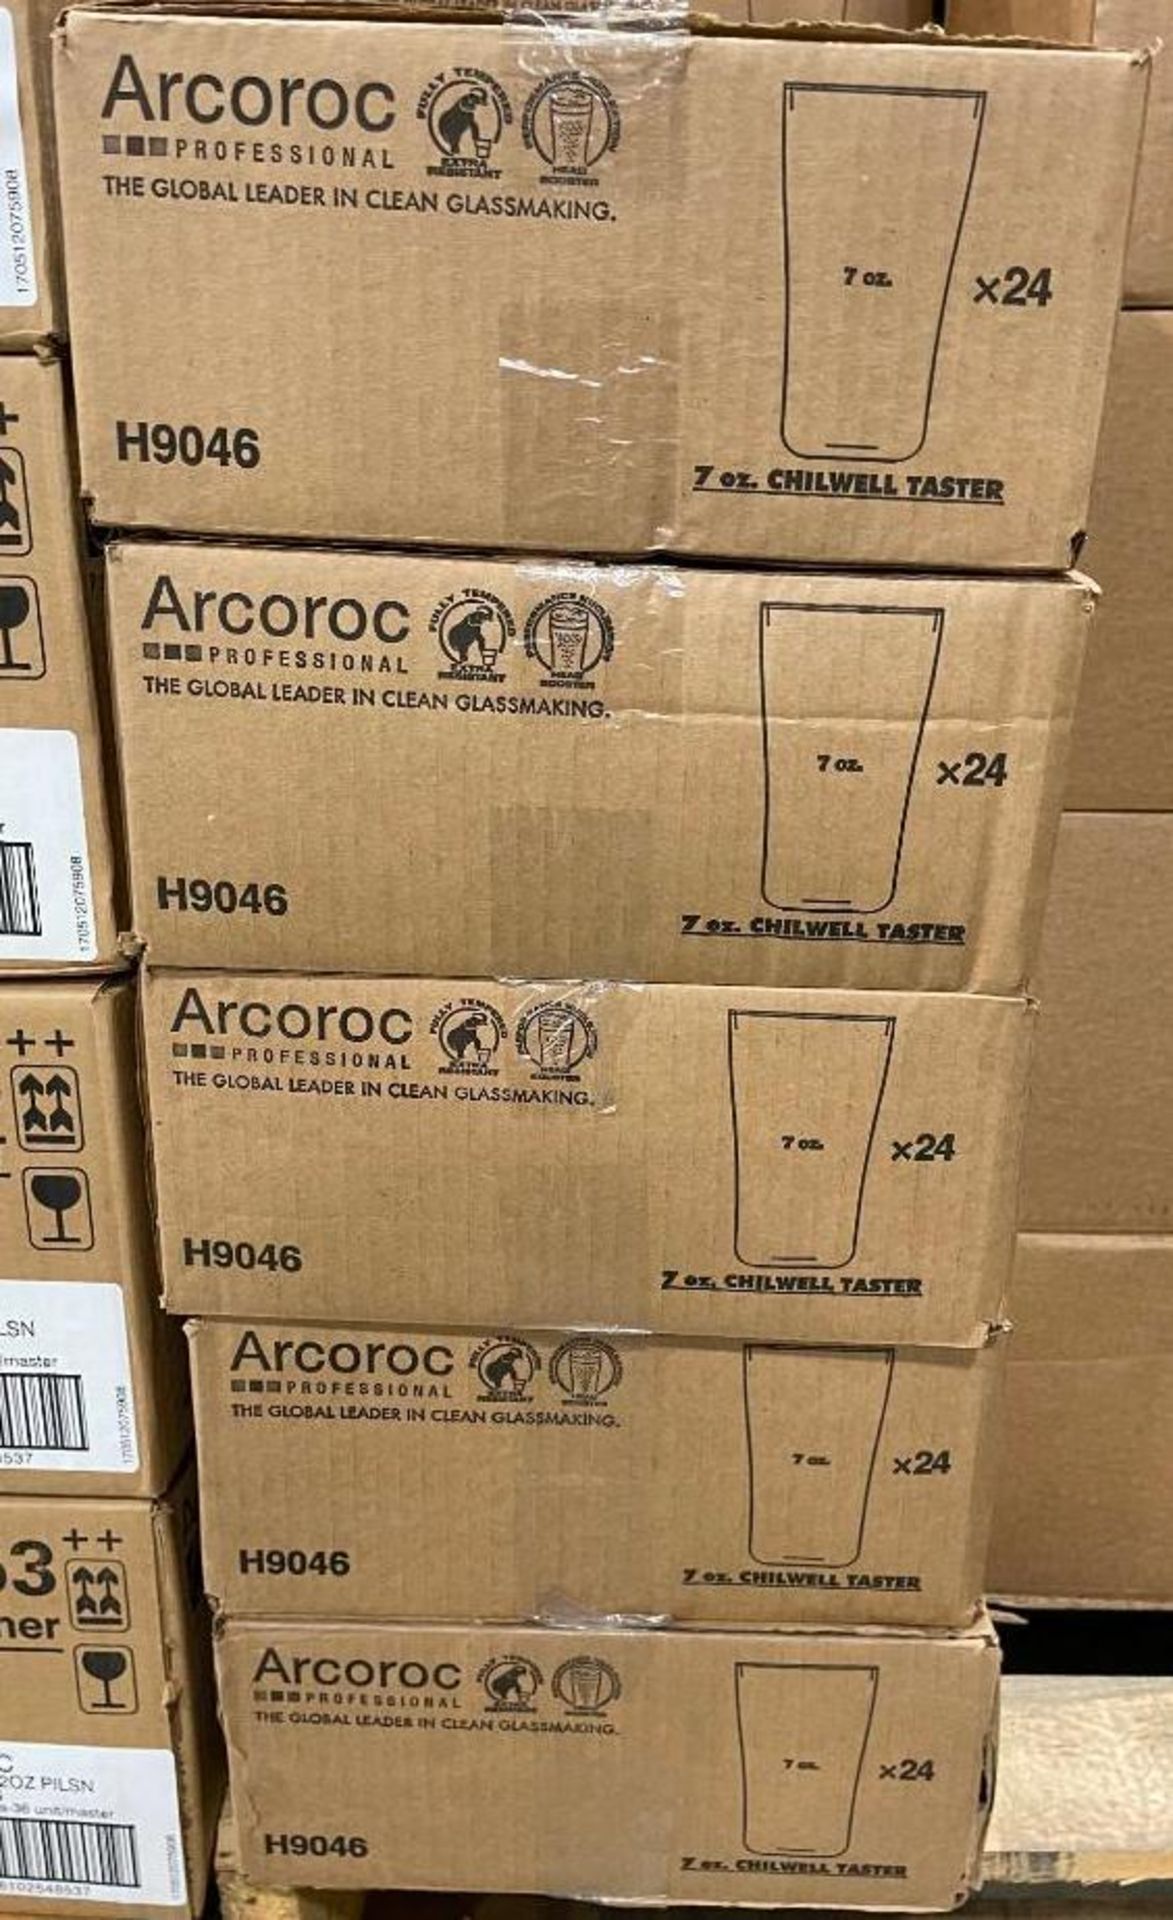 5 CASES OF ARCOROC 7 OZ CHILWELL TASTER GLASS (H9046) - 24/CASE - NEW